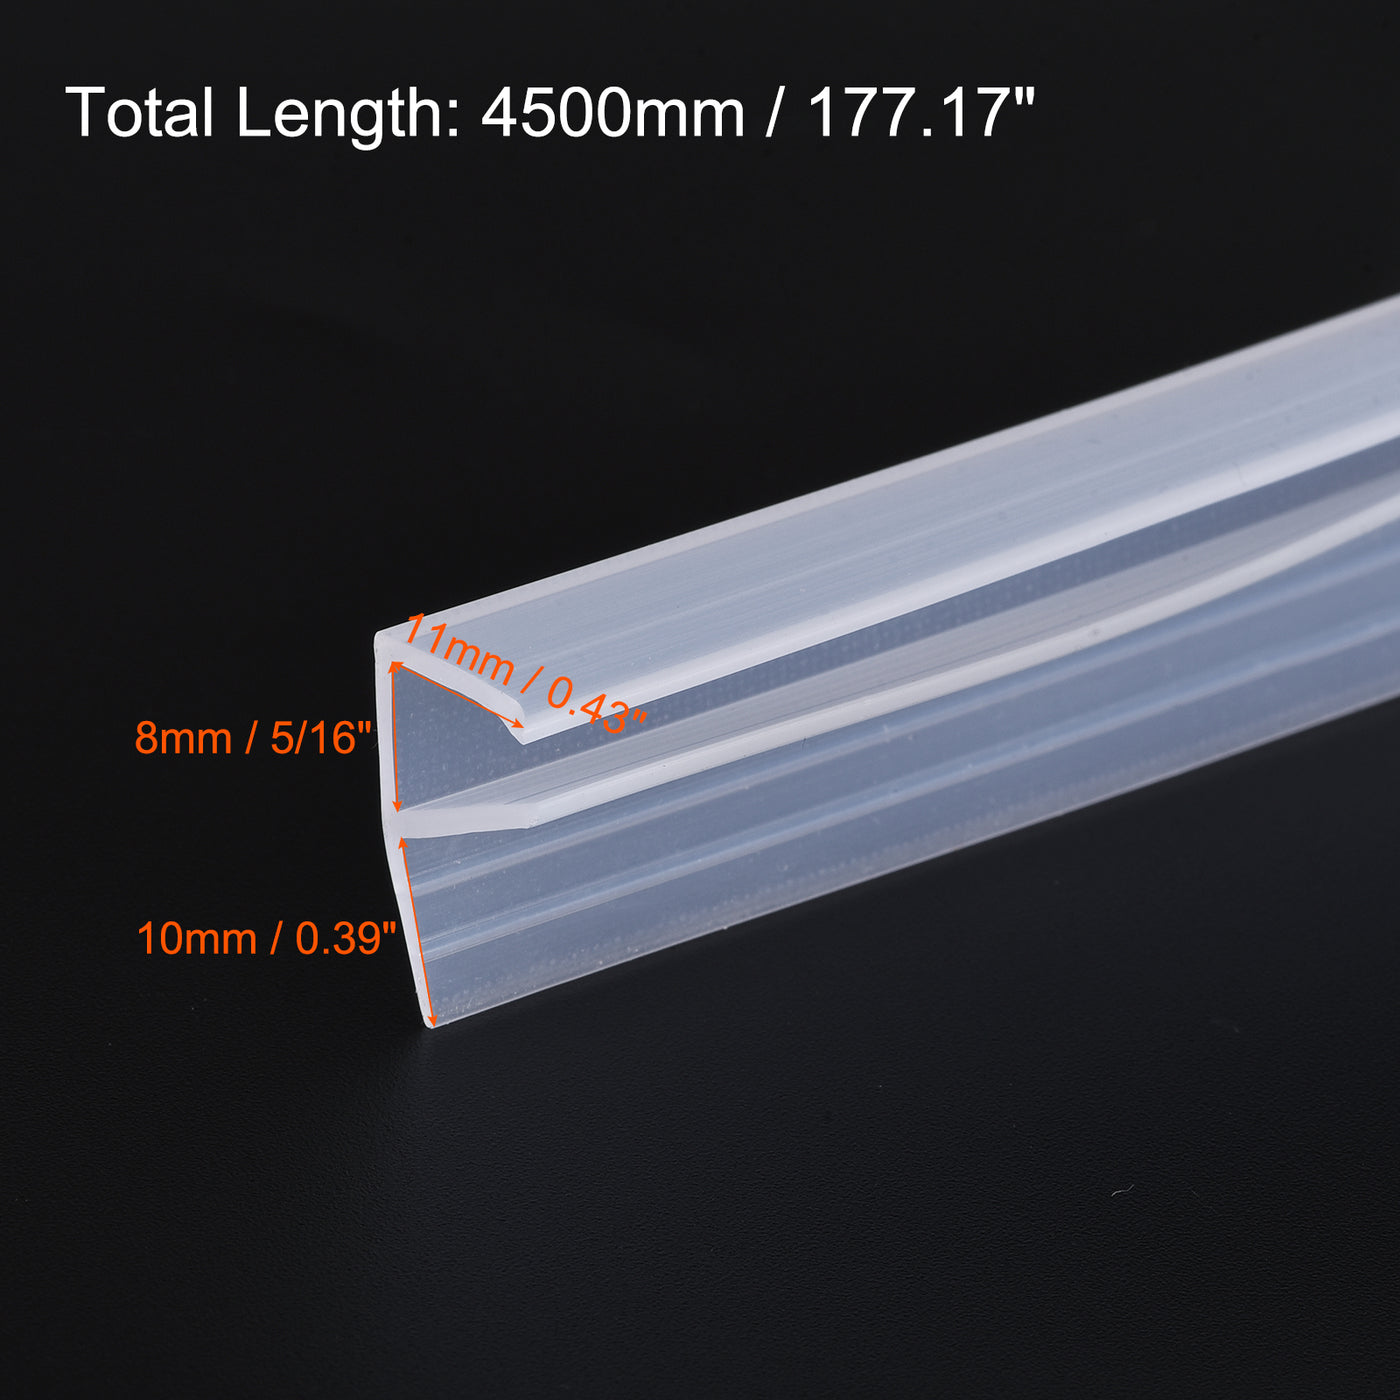 Uxcell Uxcell Frameless Glass Shower Door Sweep 177.17" for 5/16"(8mm) Glass F-Type Seal Strip